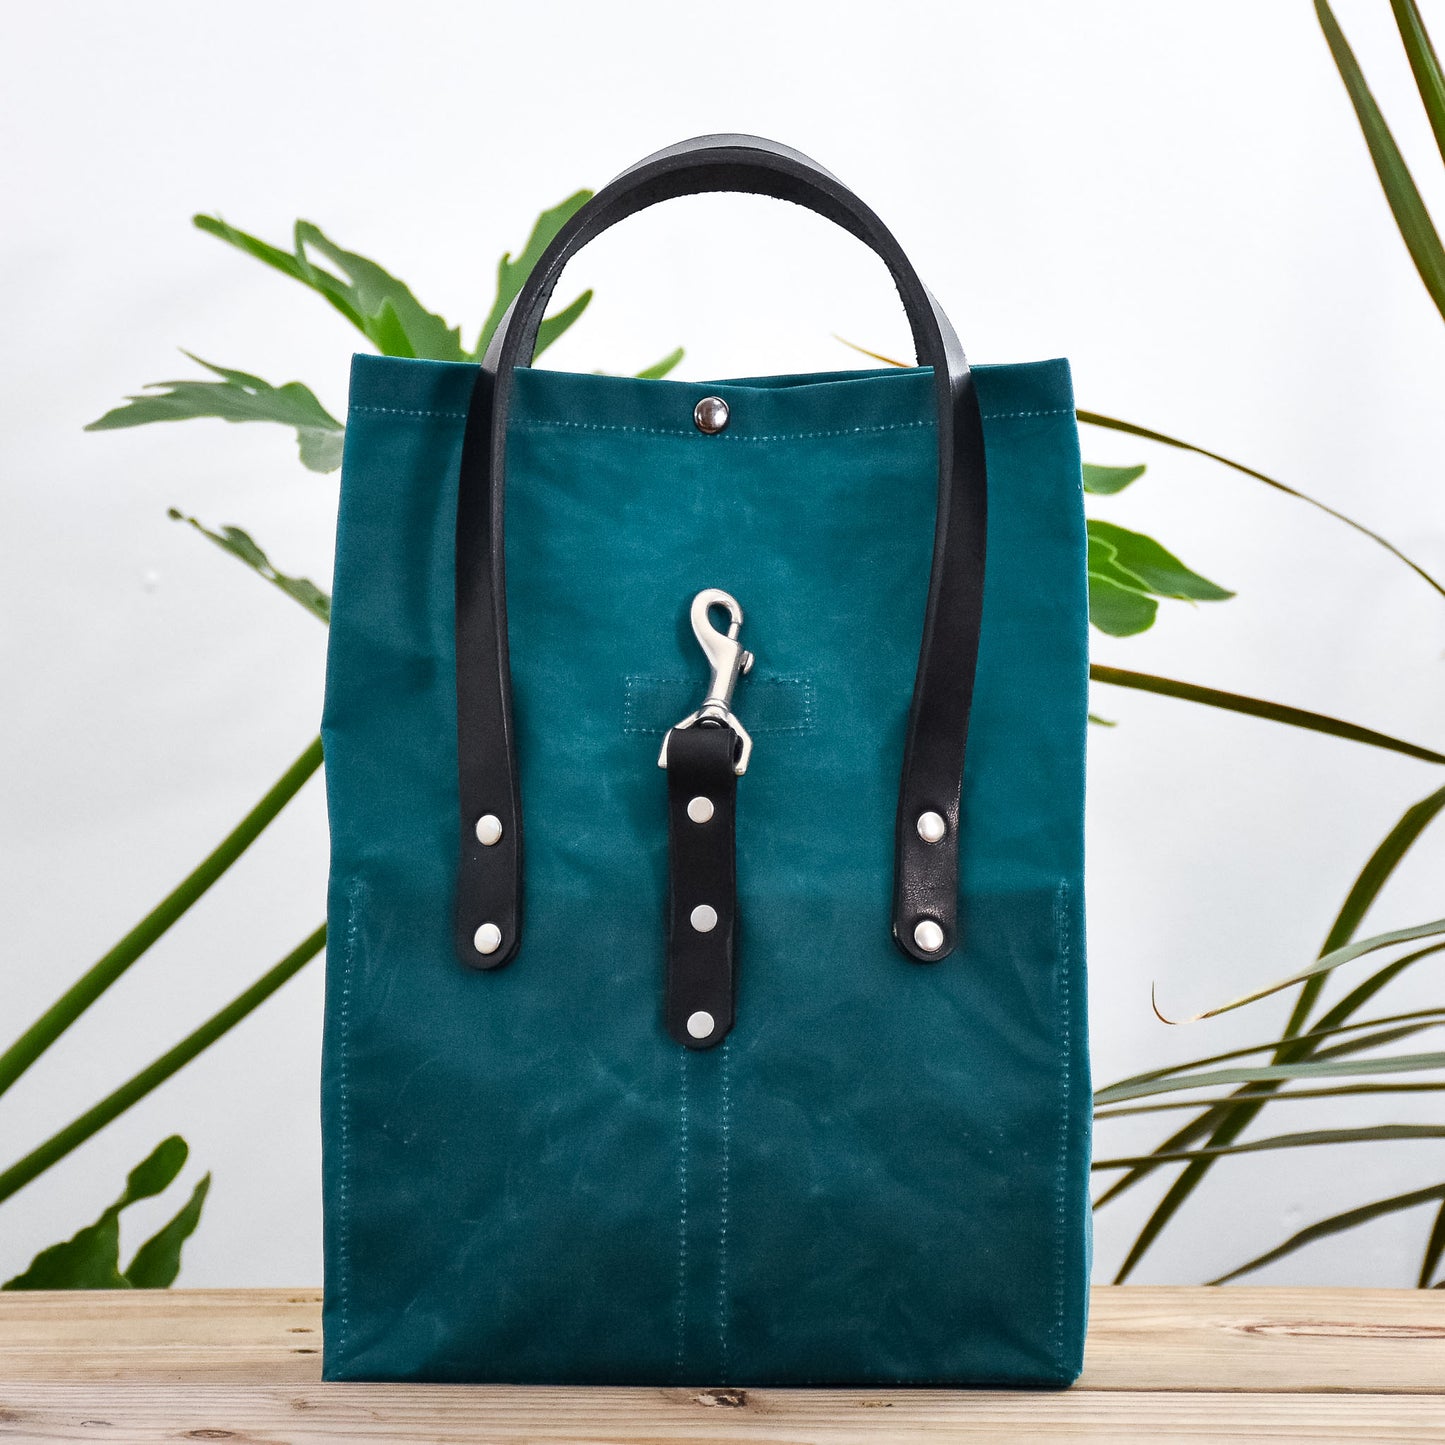 Miss Babs x Blue Spring Craft Spring 2021 - Teal and Splashy